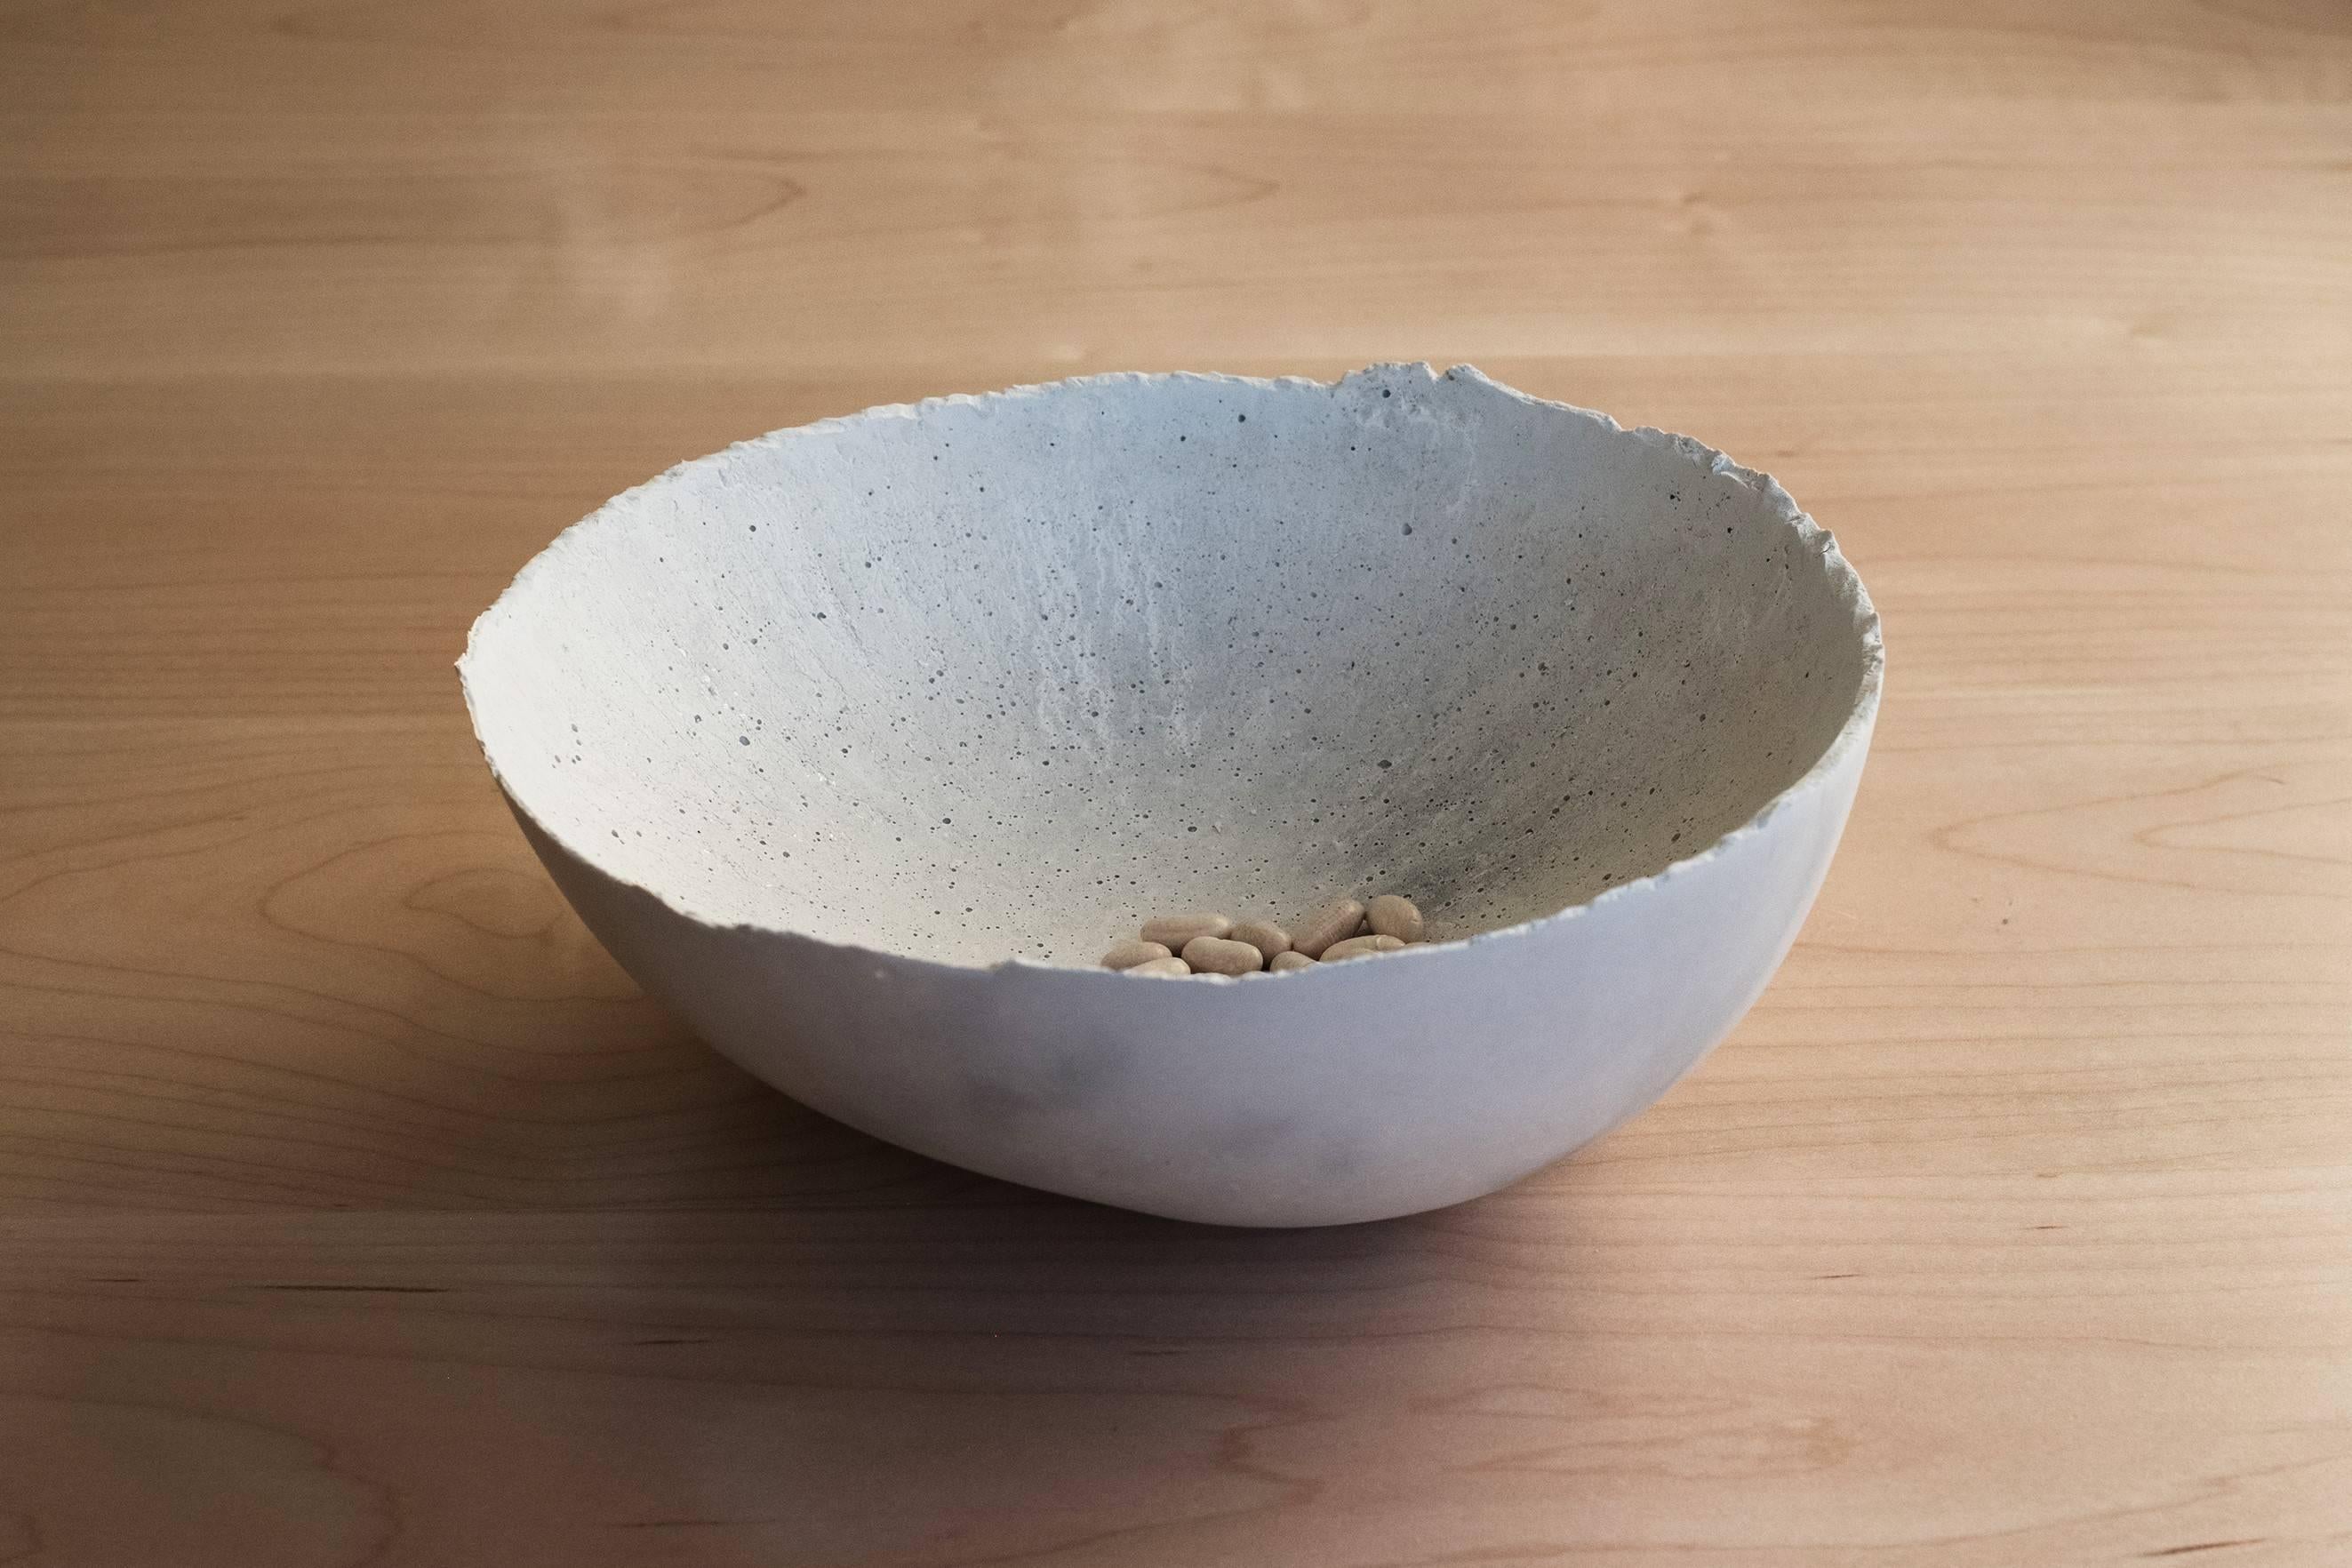 A collection of 200 unique bowls, the concrete series by UMÉ Studio expresses the tension between heavy concrete and its delicate edge generated by hand pouring. While one assumes concrete should be strong and durable, it is, at its core, fragile.